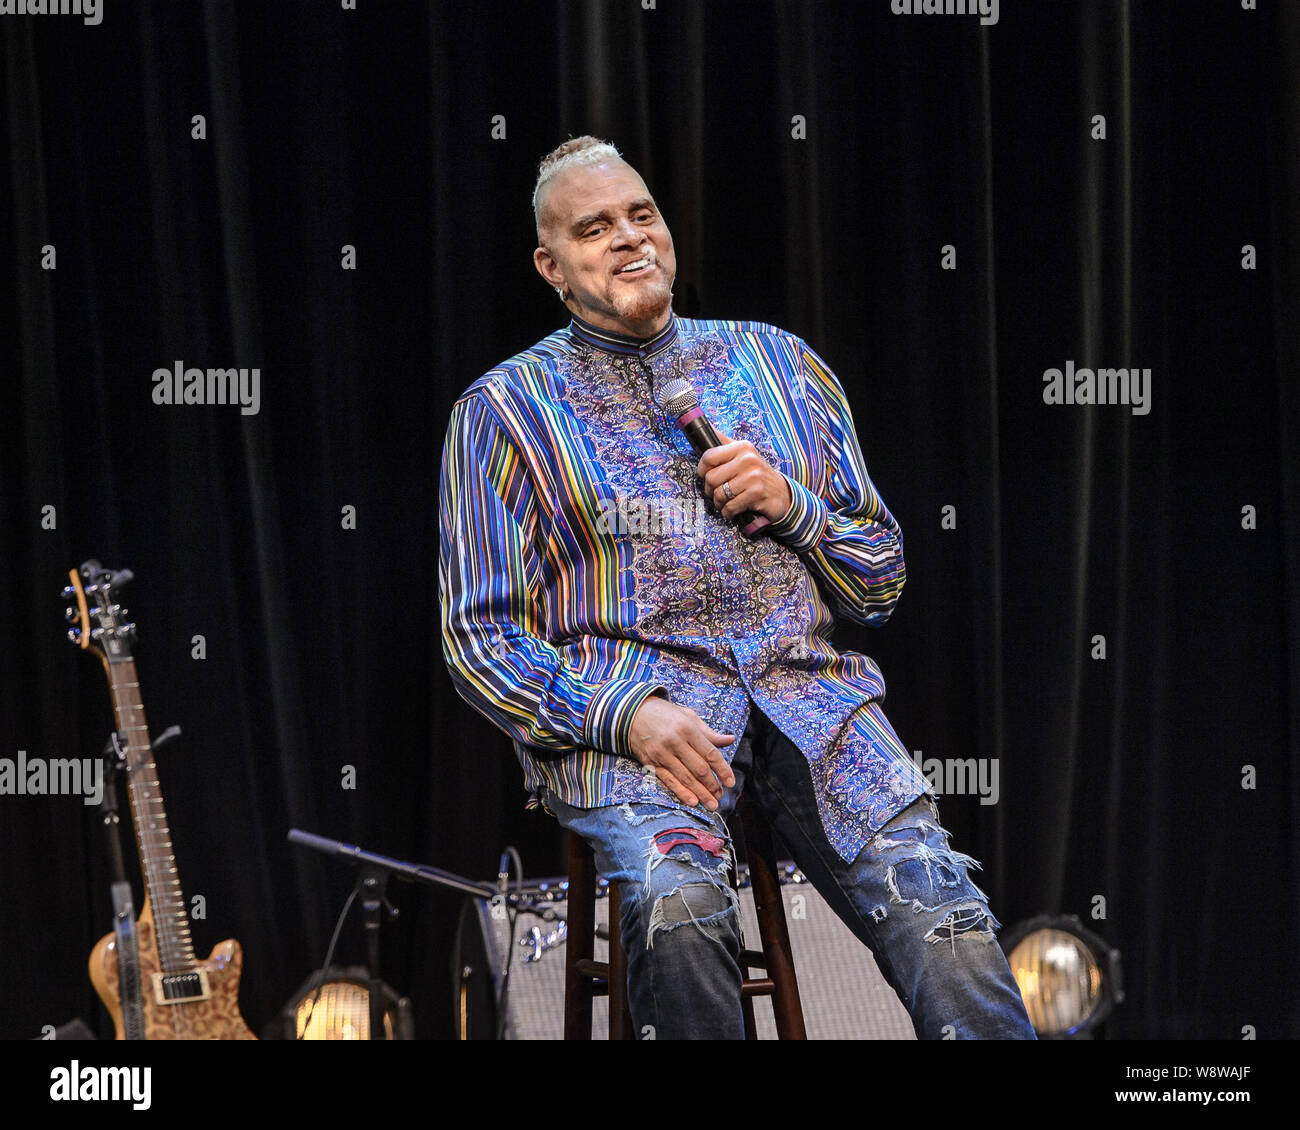 August 10, 2019, South Orange, New Jersey, U.S: SINBAD played a sold out show at  SOPAC - South Orange Performing Arts Center in South Orange, New Jersey (Credit Image: © Lisa Piernot/ZUMA Wire) Stock Photo